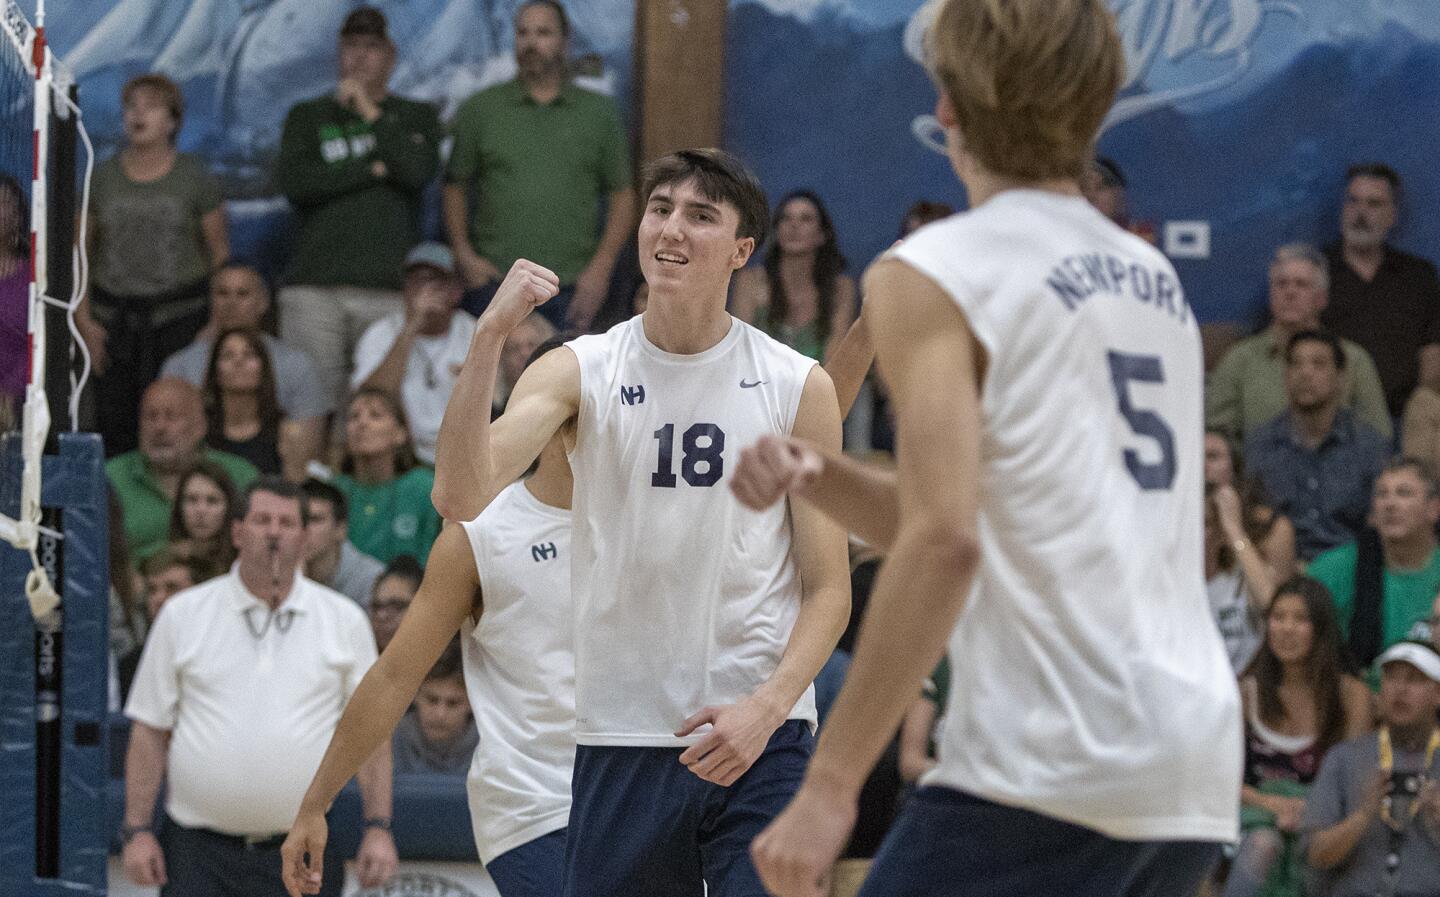 Photo Gallery: Newport Harbor vs. South Torrance in volleyball